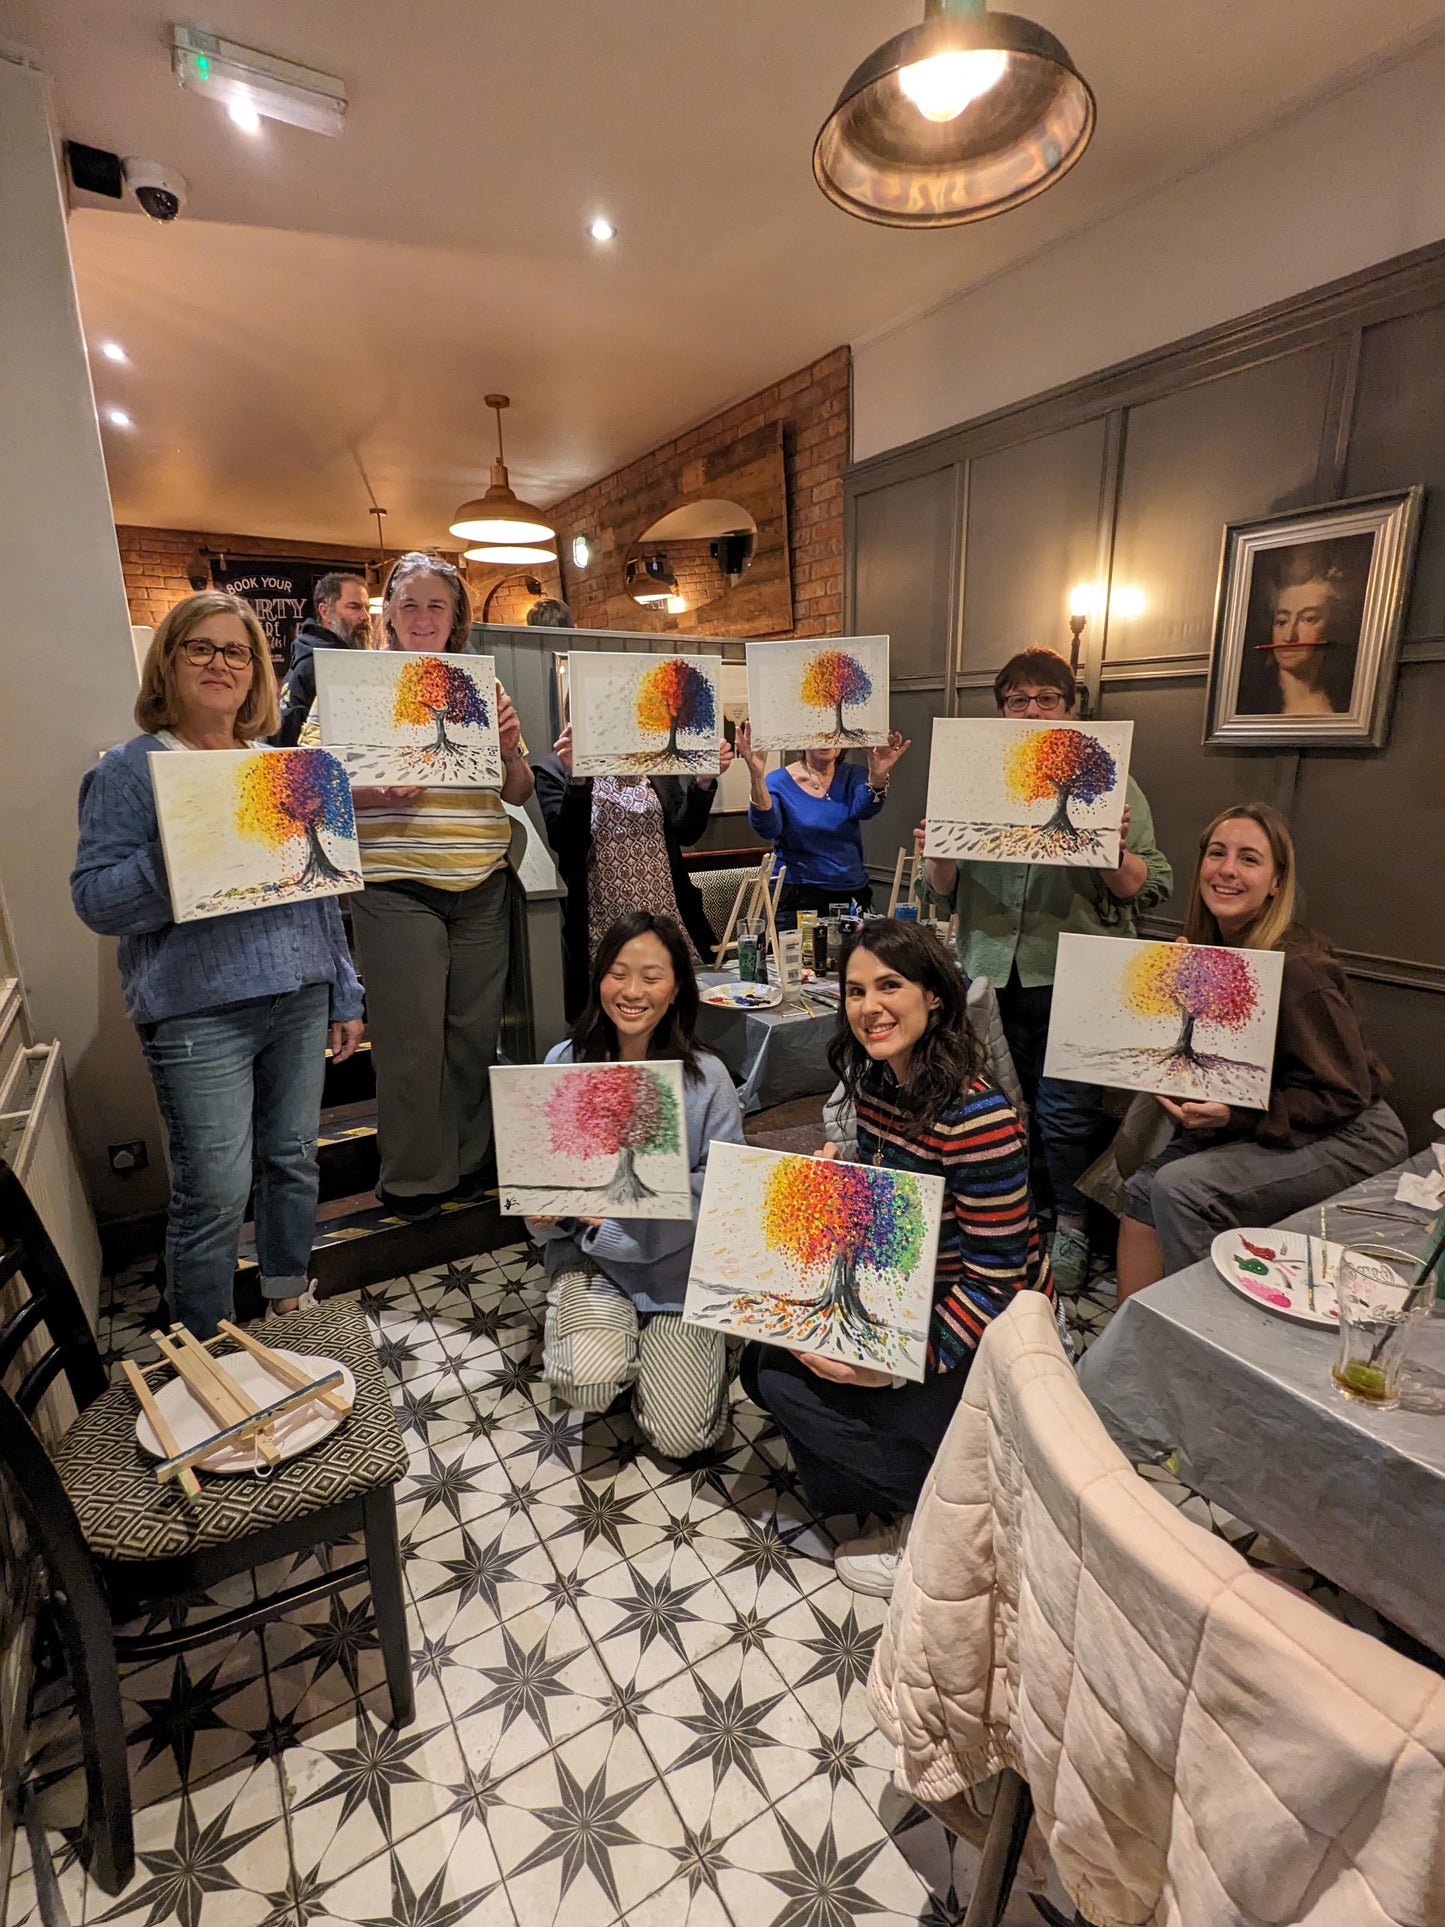 CORPORATE PAINTING WORKSHOP - Team building event at your place of work!